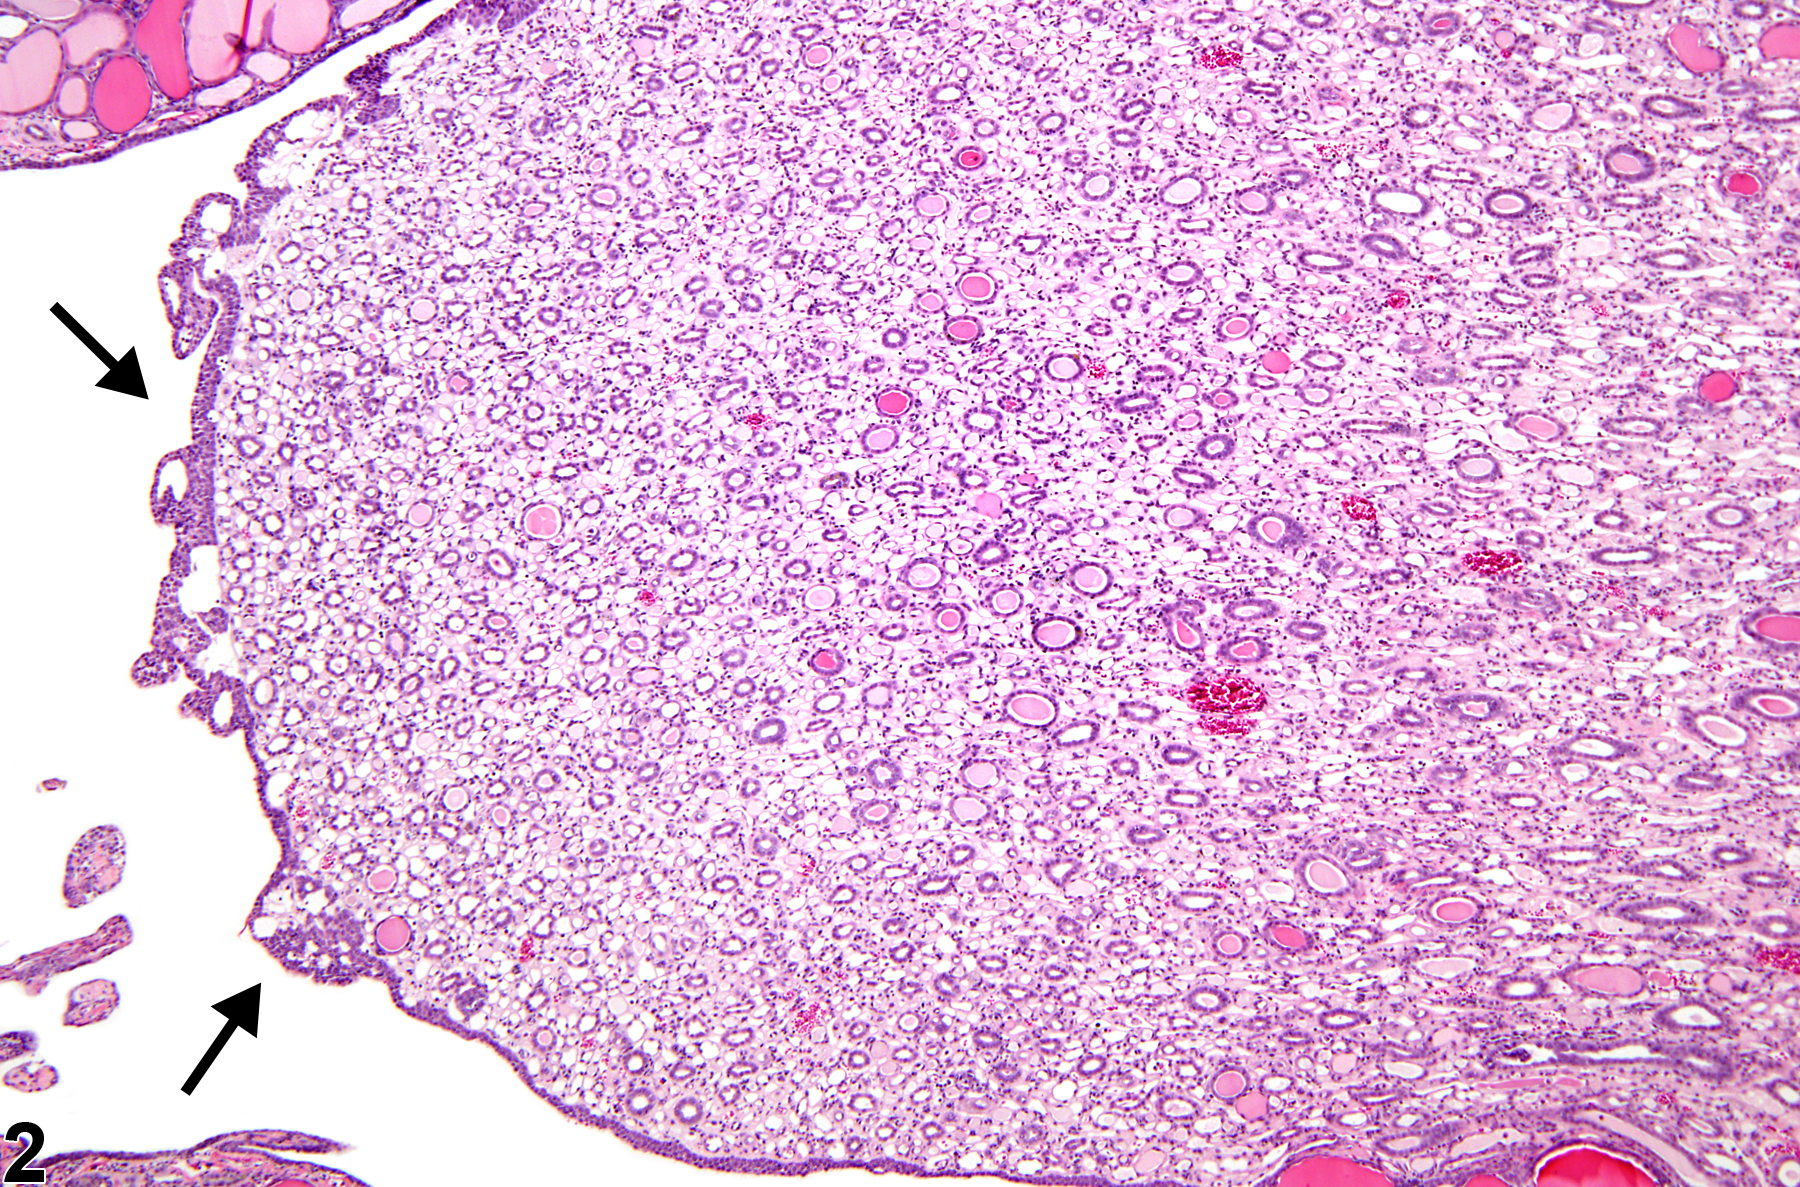 Image of papilla epithelium hyperplasia in the kidney from a male F344/N rat in a chronic study